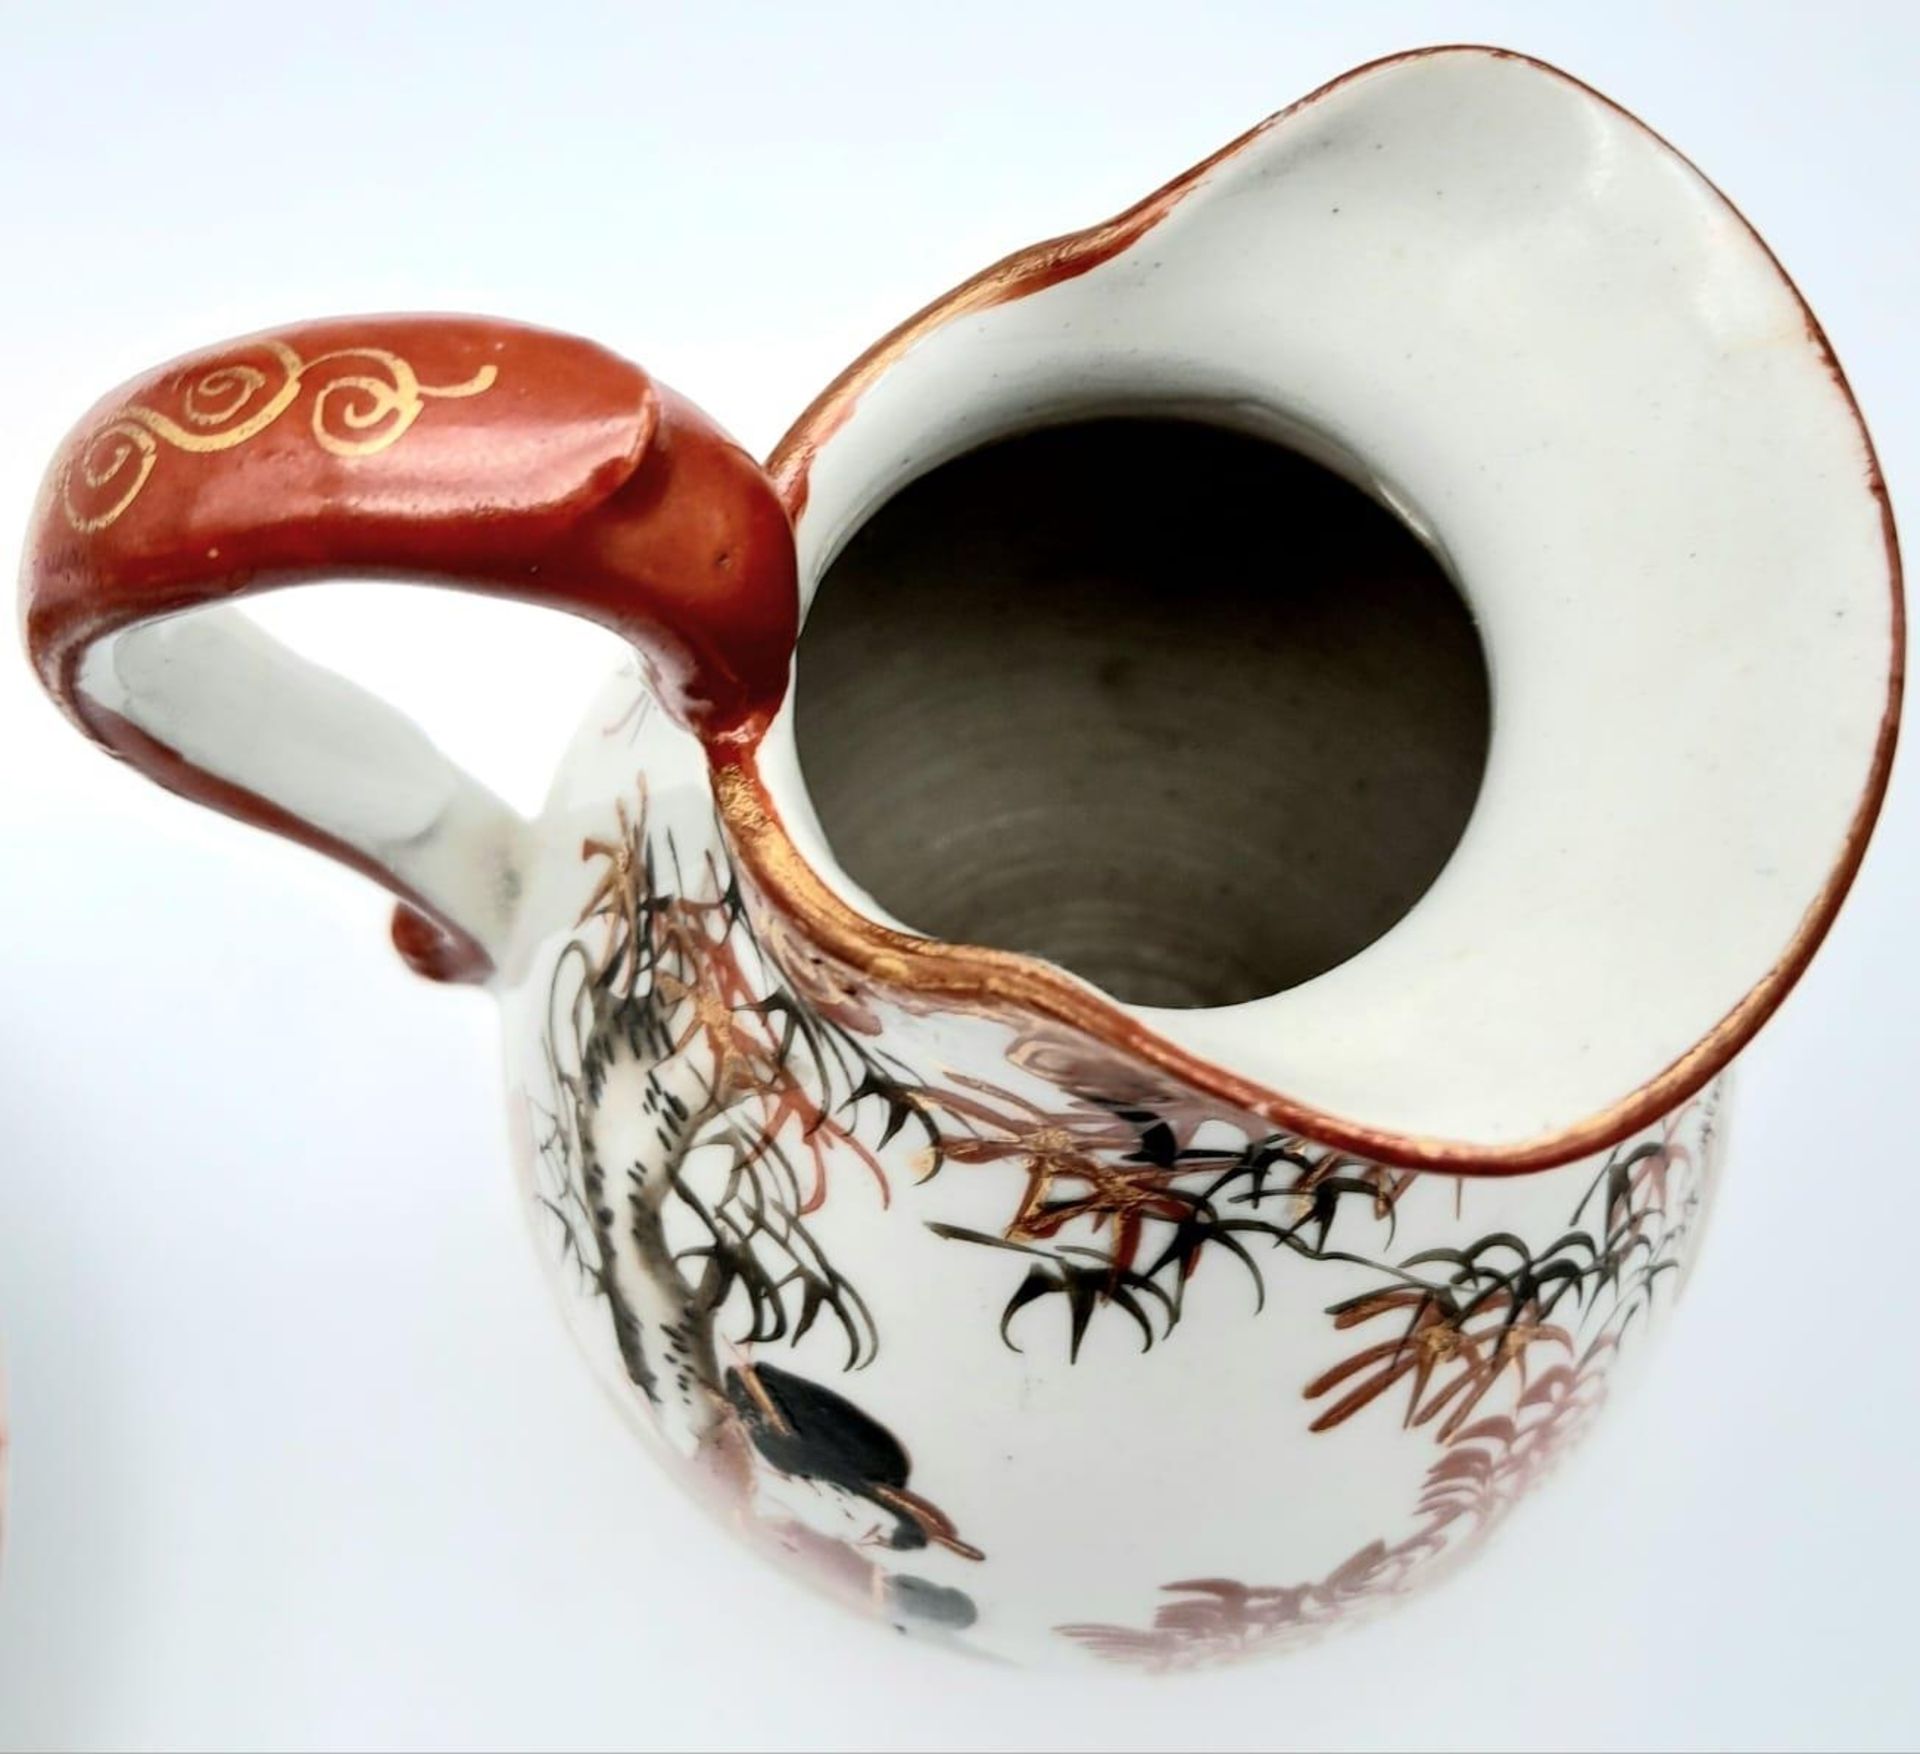 A SMALL JAPANESE WATER JUG AND SAUCER FROM LATE 19TH CENTURY . 13cms TALL - Image 7 of 9